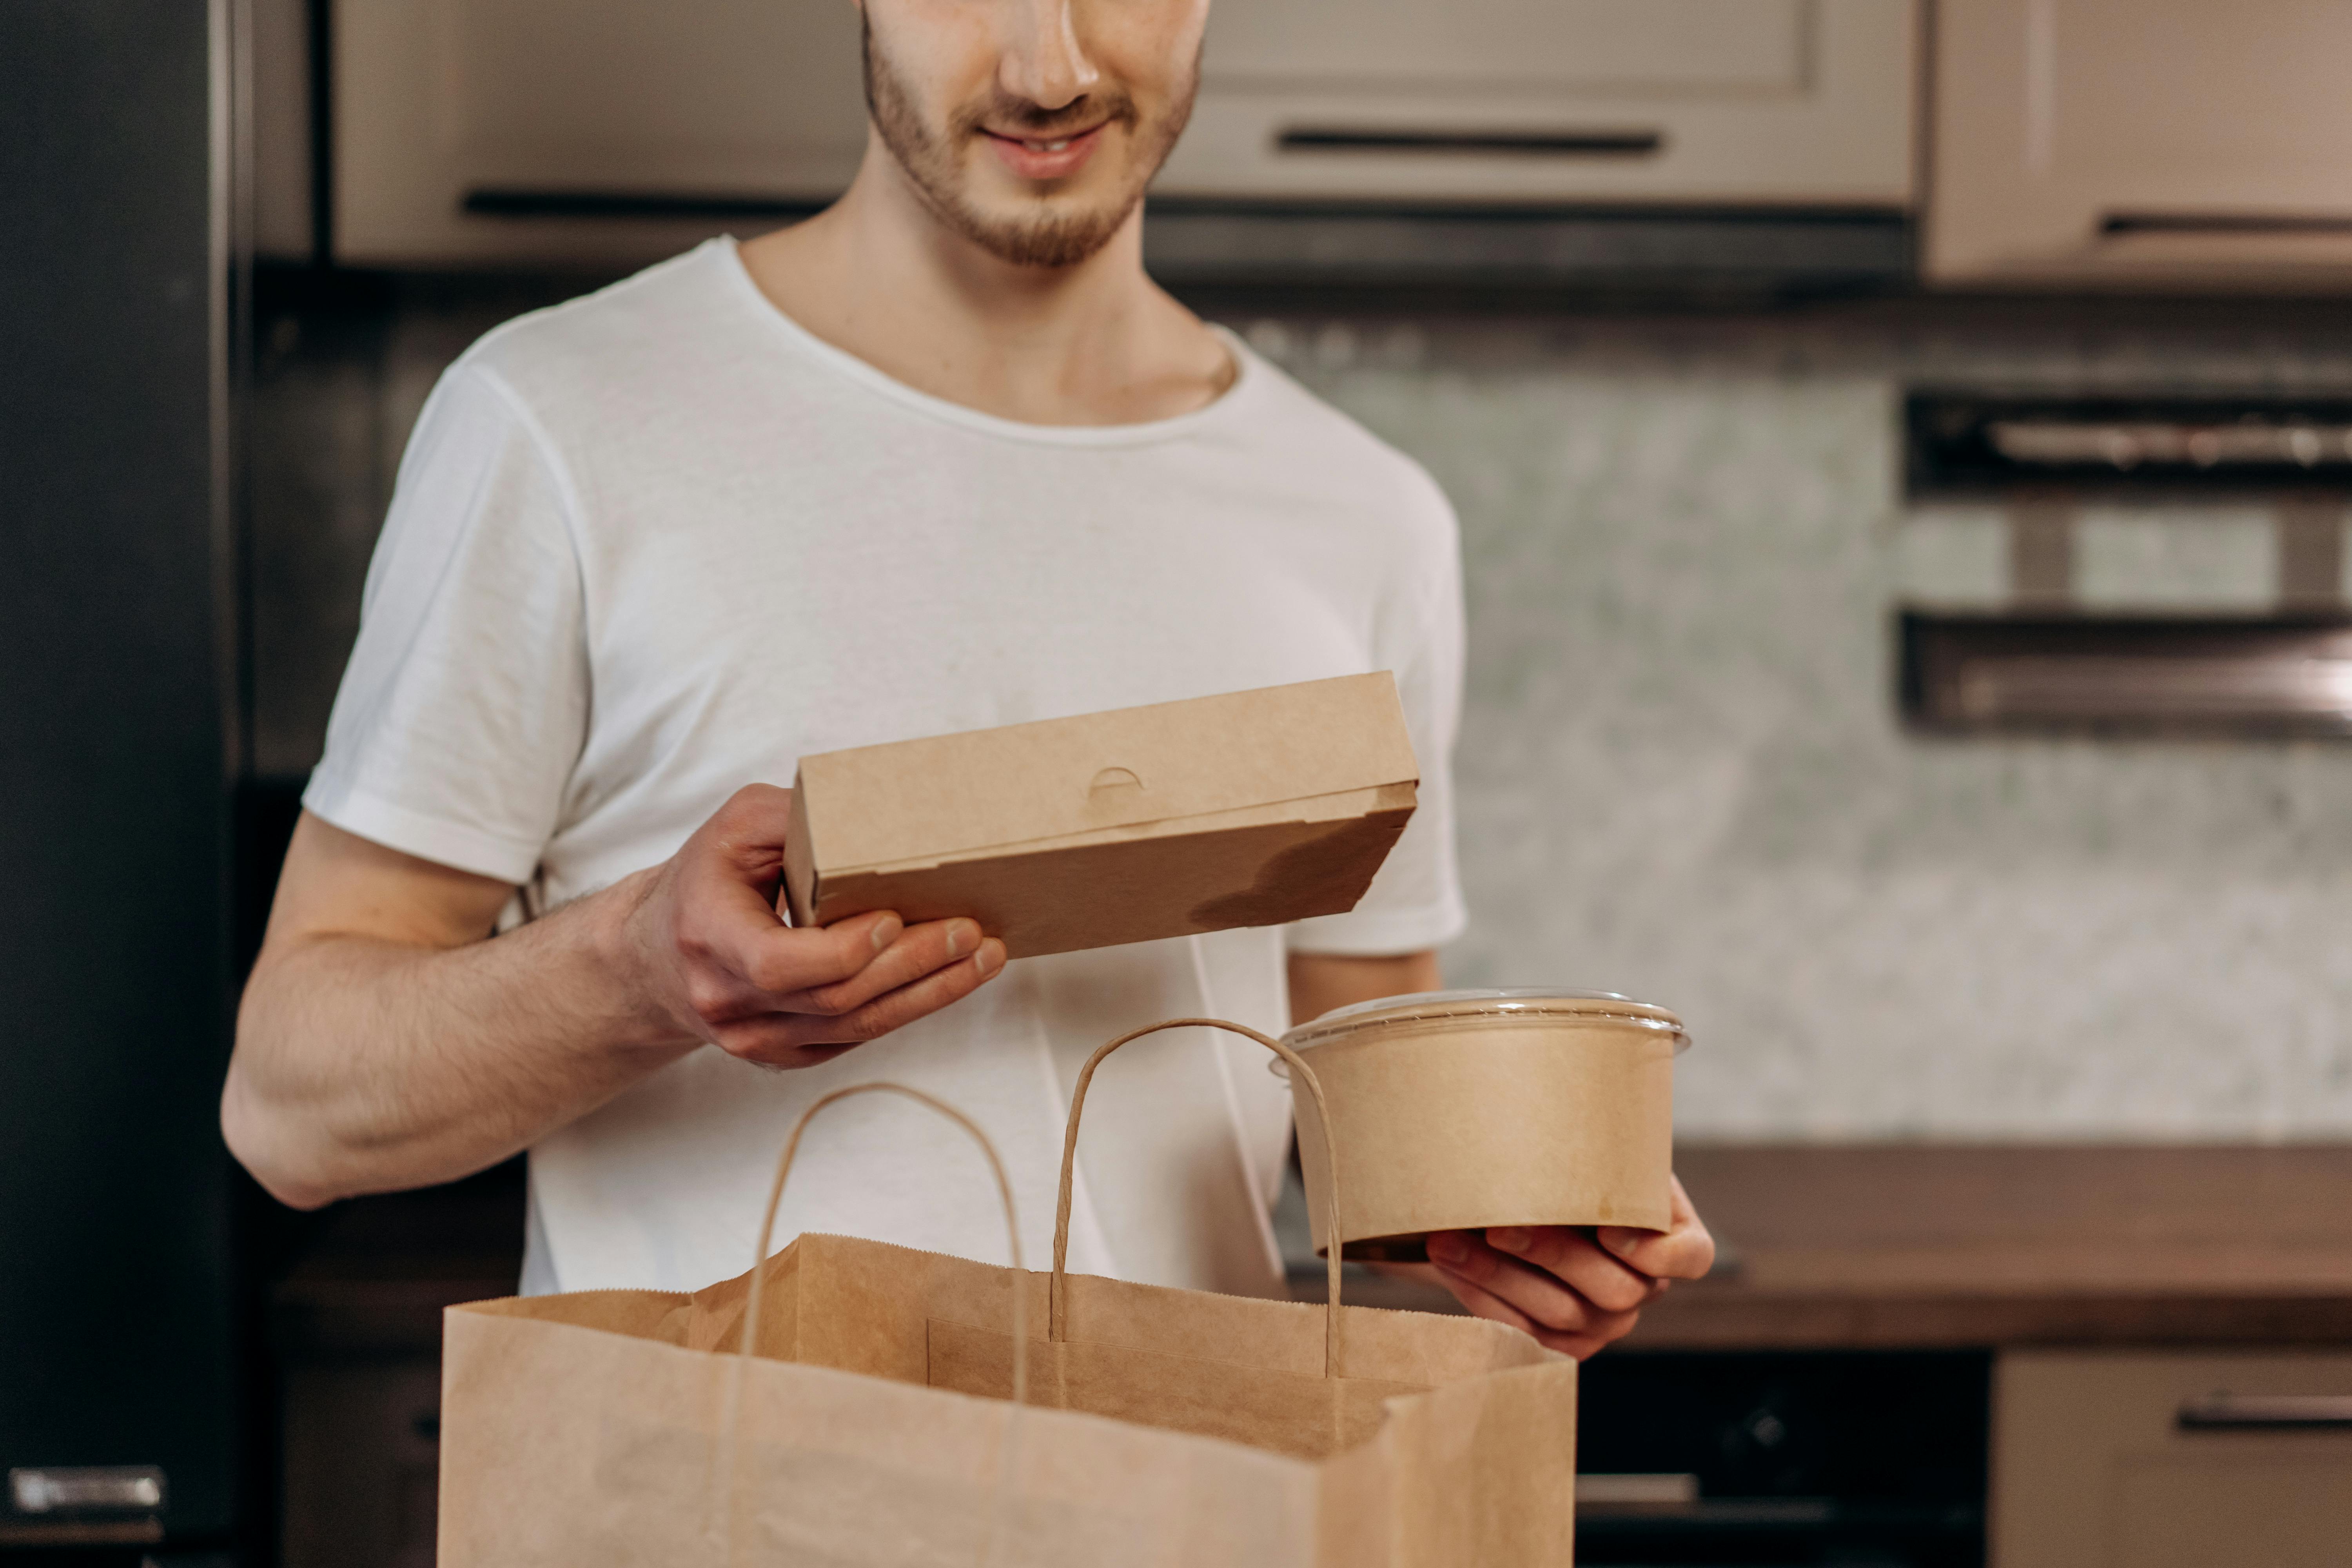 Understanding the Growth of Meal Kit Delivery Services